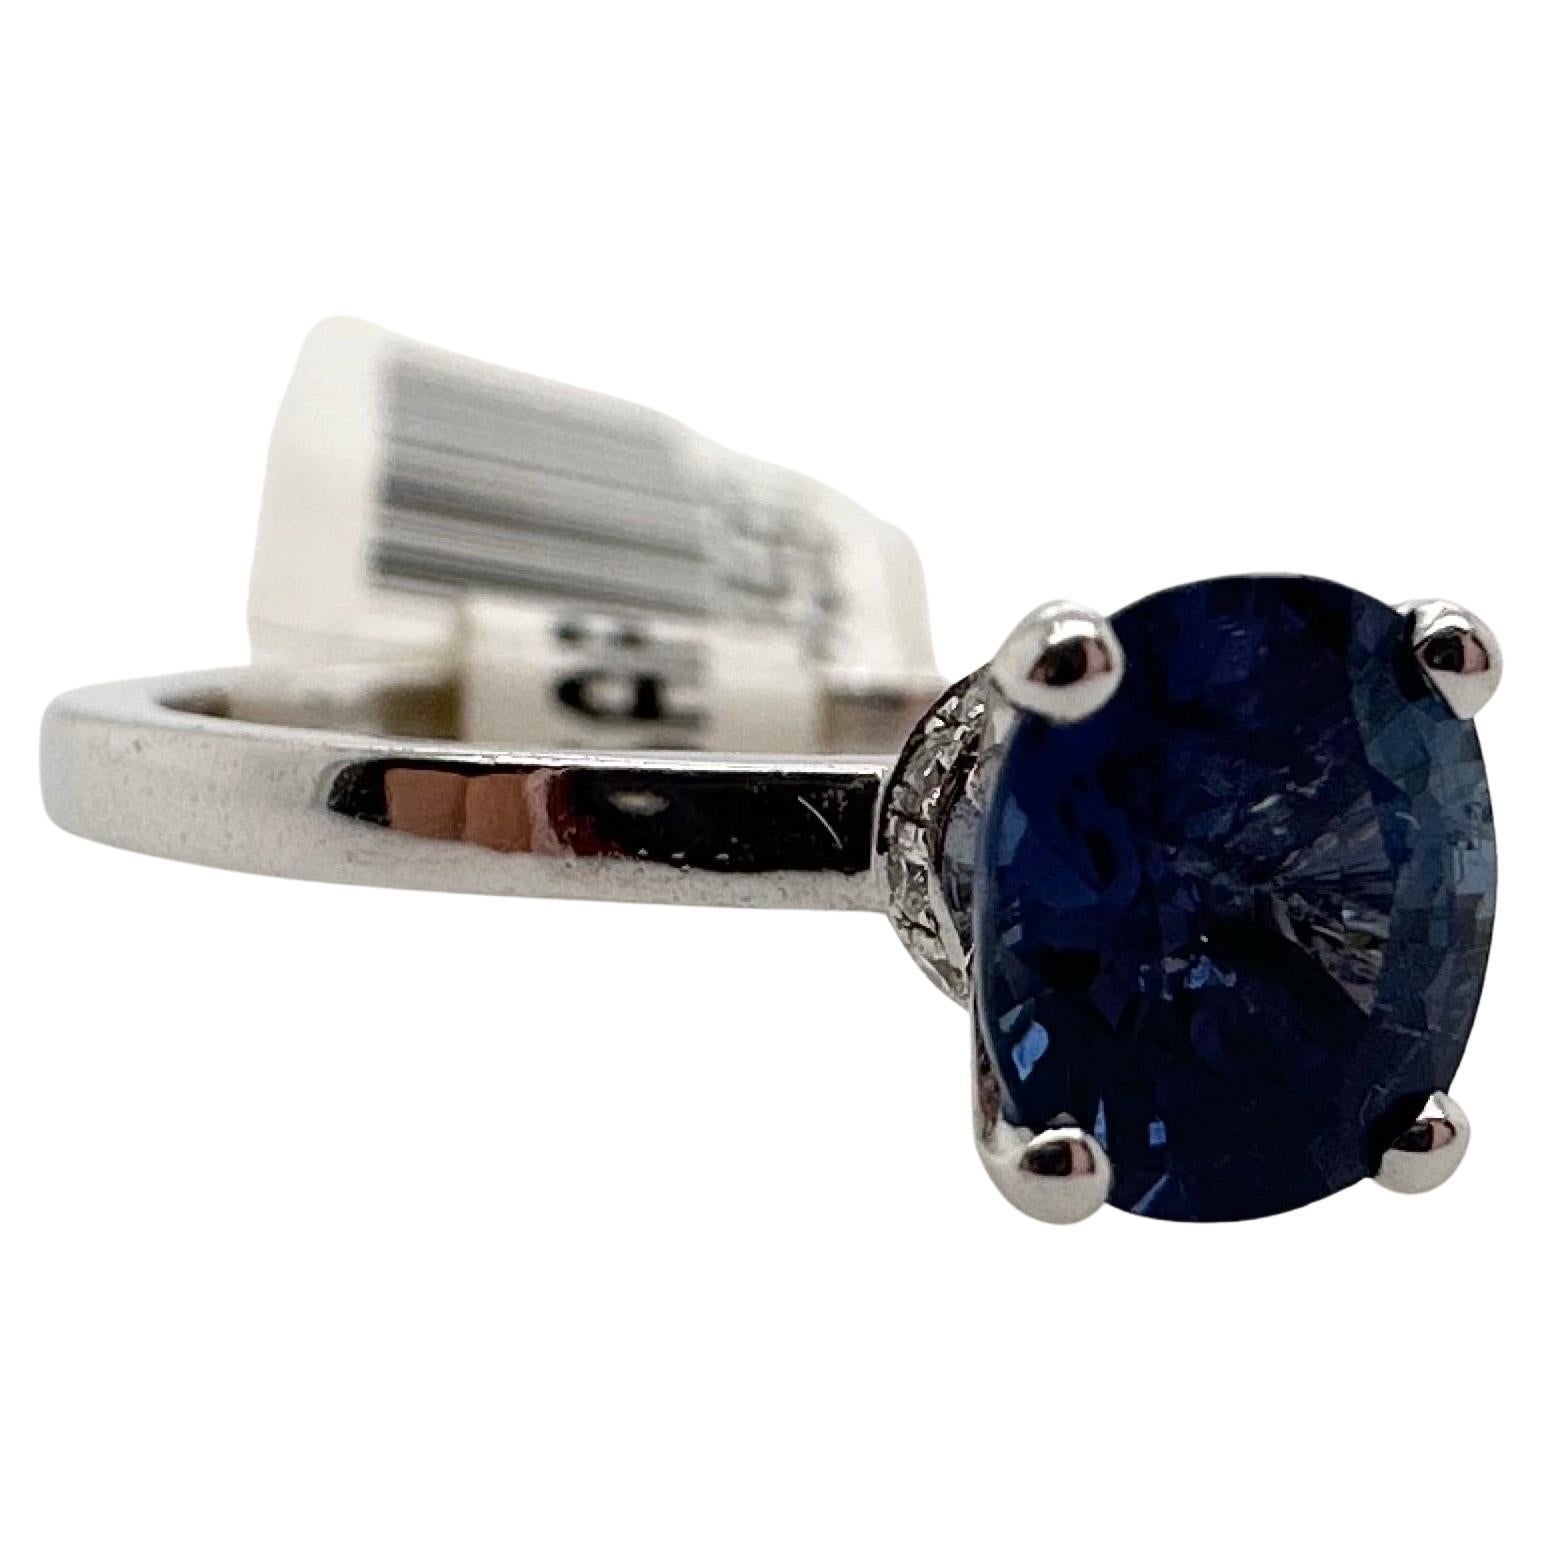 Ceylon sapphire ring with hidden diamonds set under the gallery. The ring is made in 14KT white gold, very classical engagement ring.

Metal Type: 14KT

Natural Sapphire(s):
Color: Blue
Cut:Cushion
Carat: 1.09ct
Clarity: Moderately Included

Natural